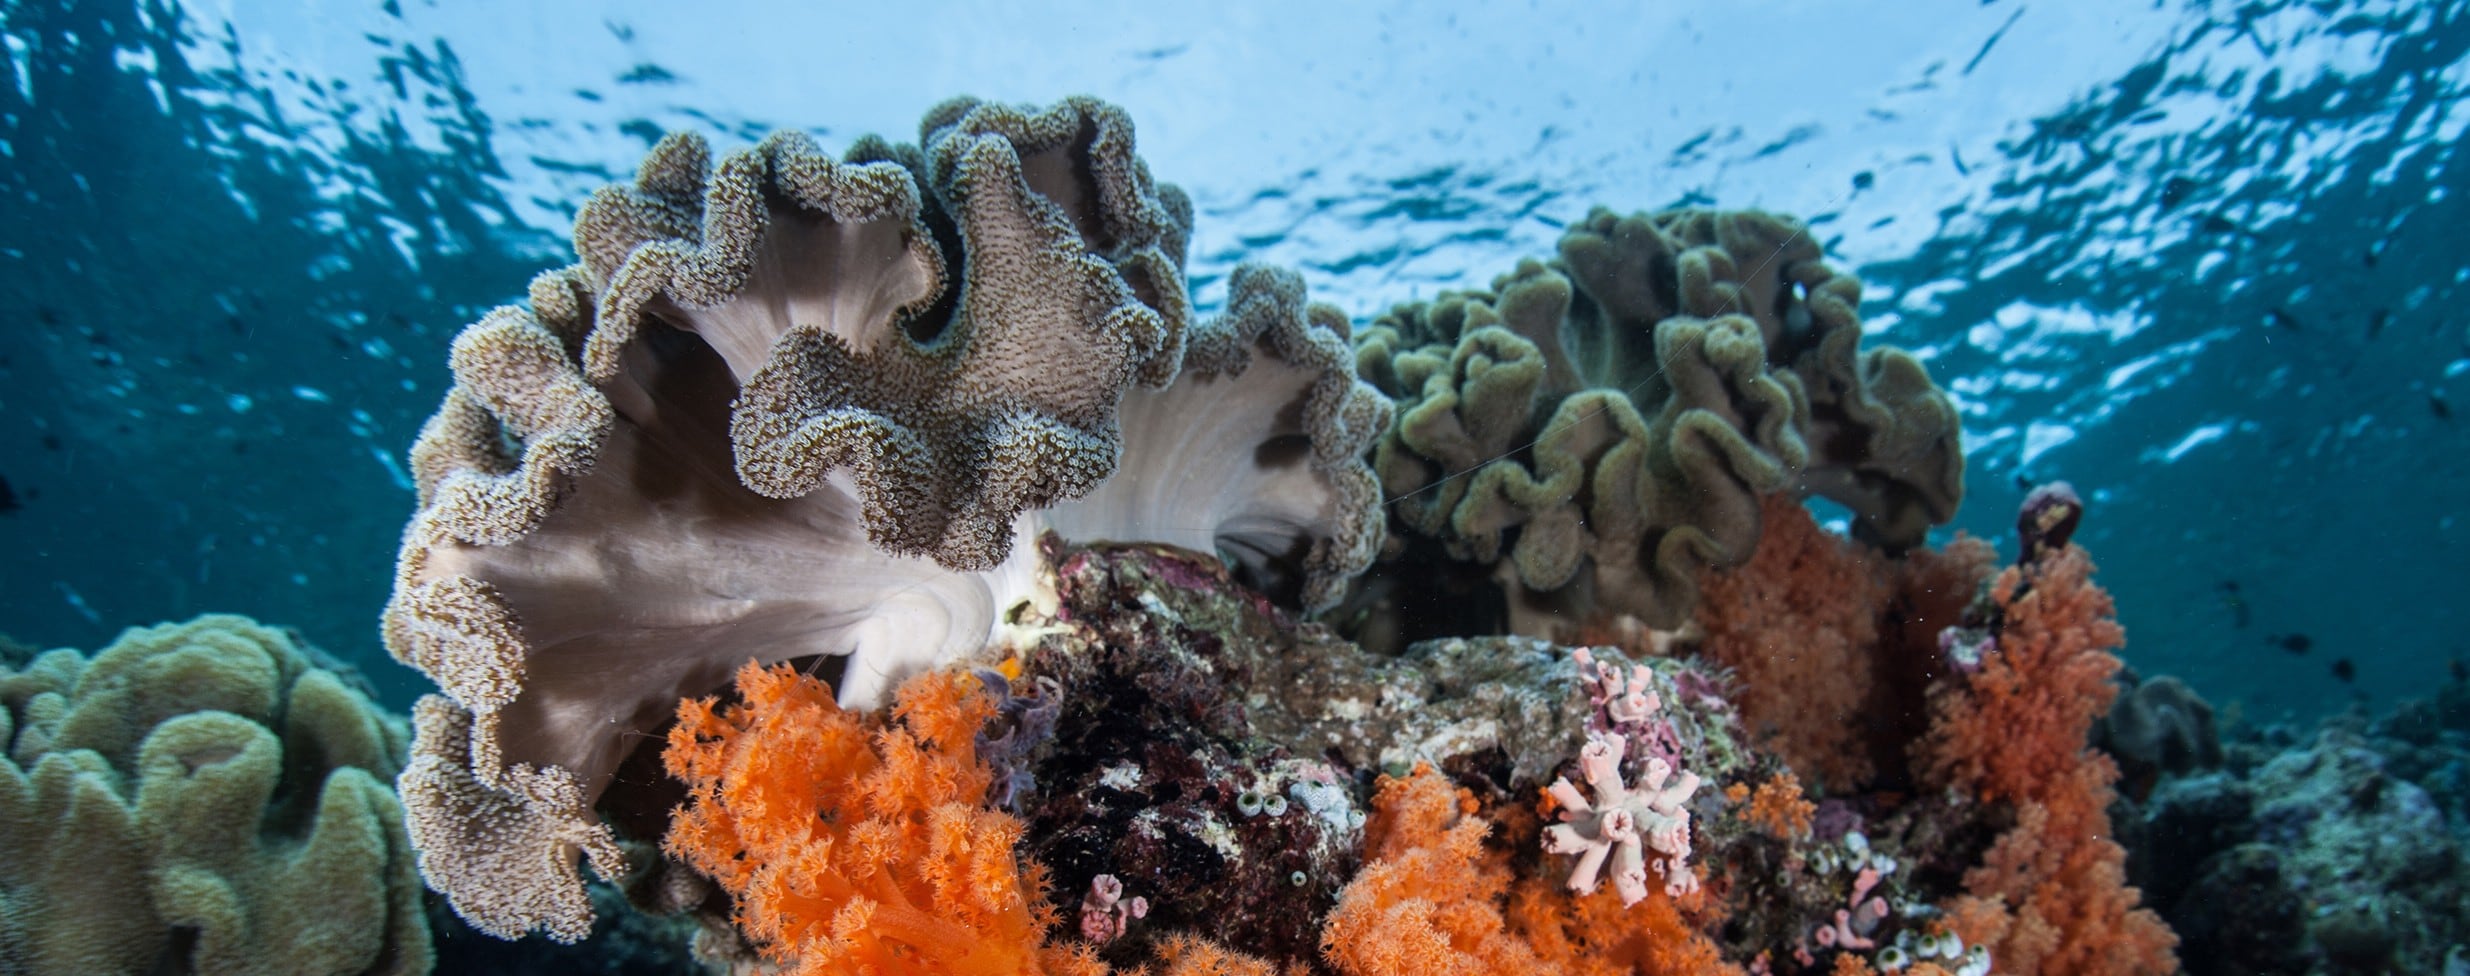 Wakatobi National Marine Park, Underwater Paradise in The Heart of Asia-Pacific Coral Triangle  